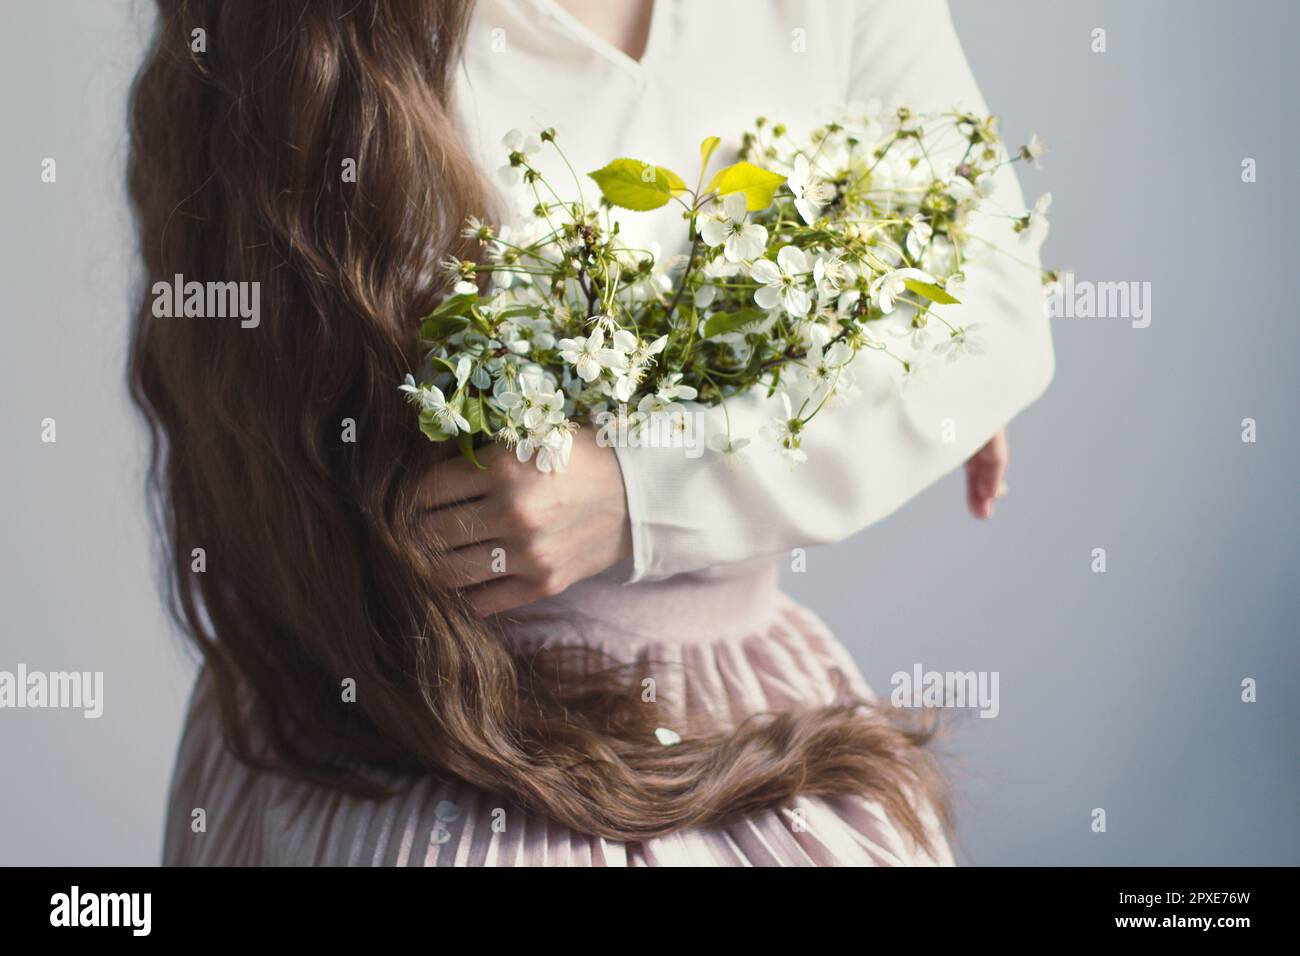 Close up woman with long hair embracing wildflowers concept photo. Romantic mood. Front view photography with blurred background. High quality picture Stock Photo